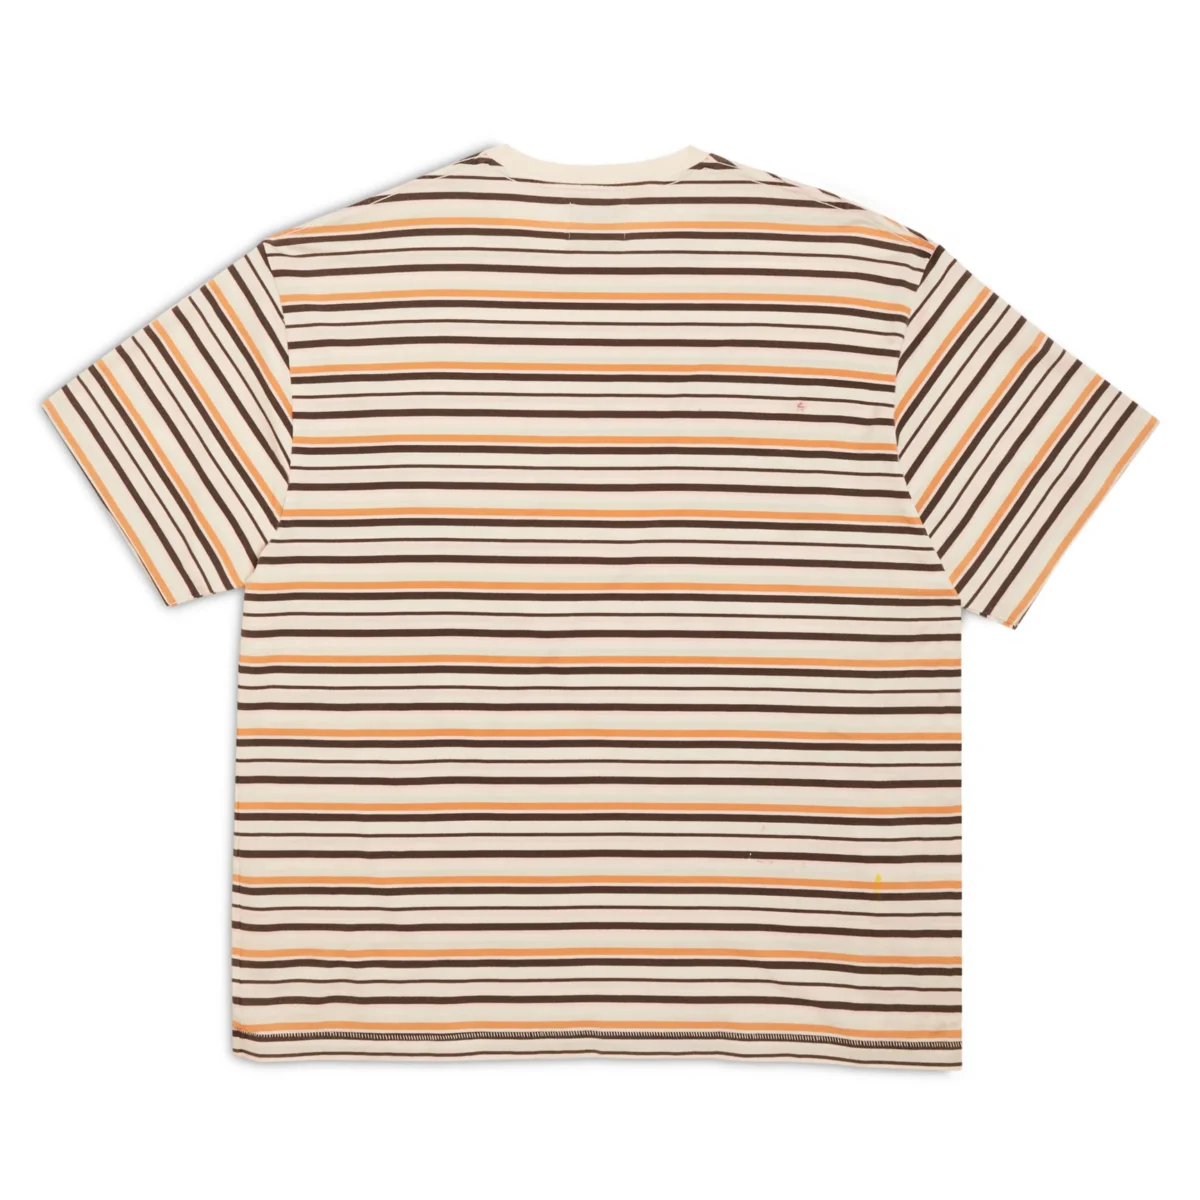 Gallery Dept Nelson Striped Tee